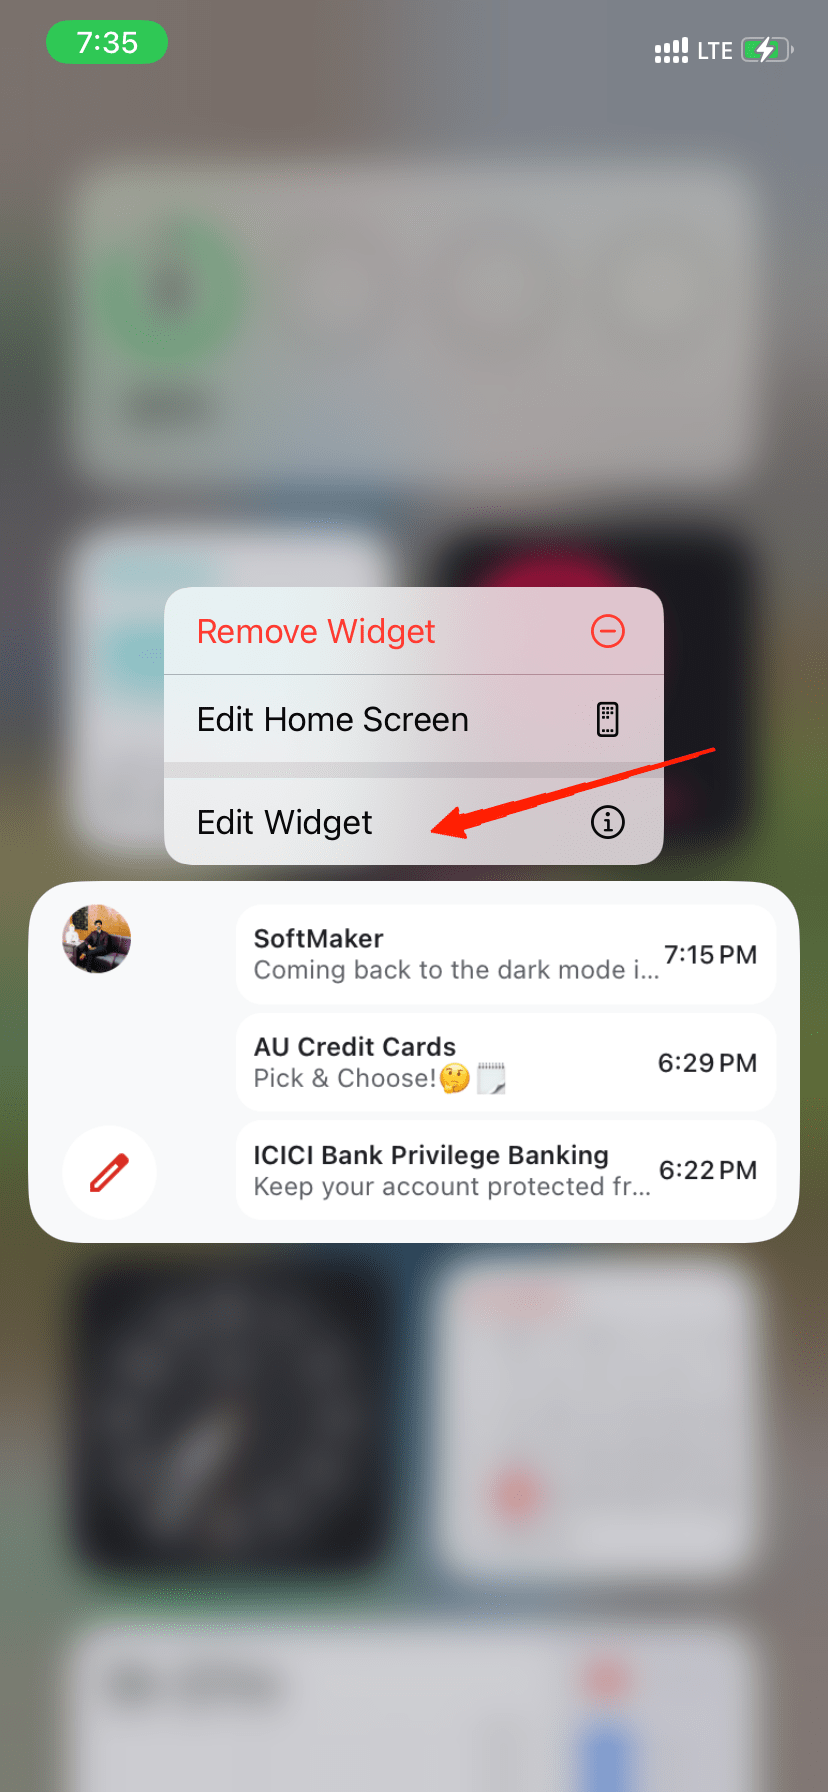 Tap on the widget and hold until the Edit menu pops out